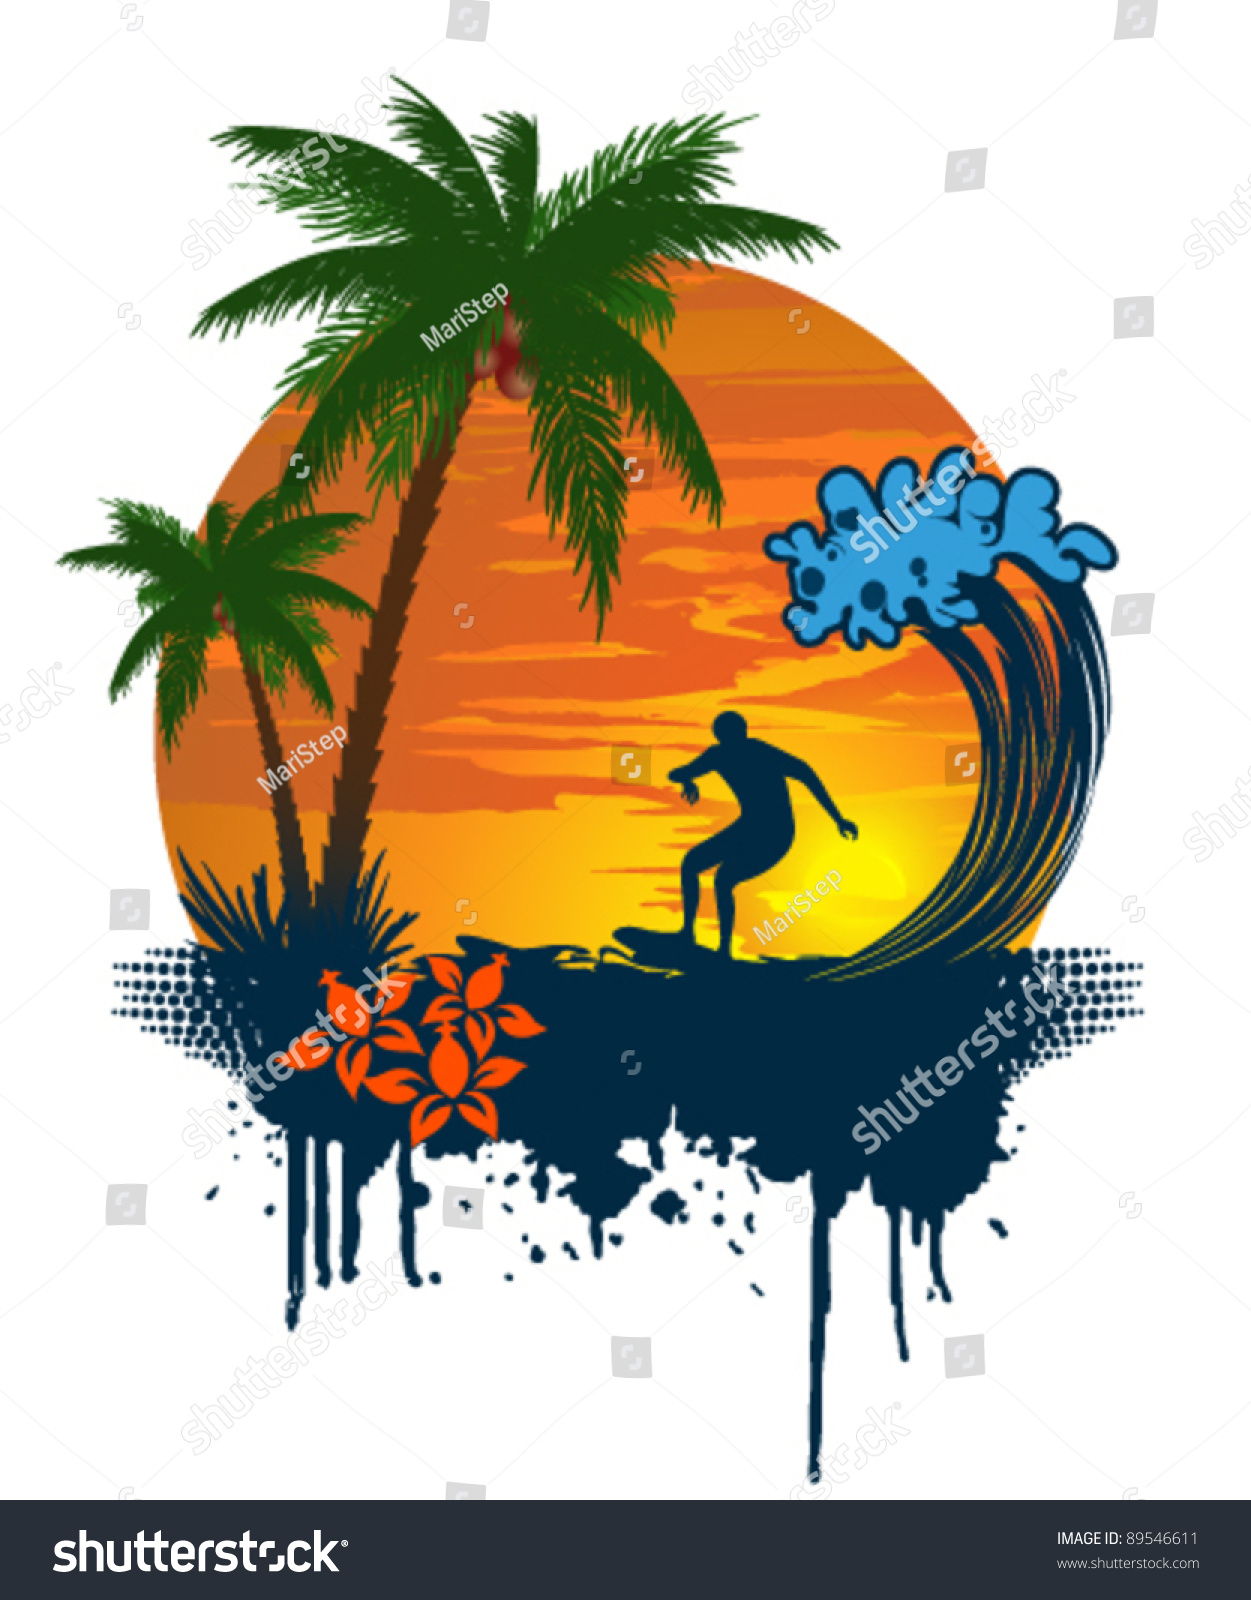 Silhouette Palm Surfer On Tropical Sunset Stock Photo (Photo, Vector ...